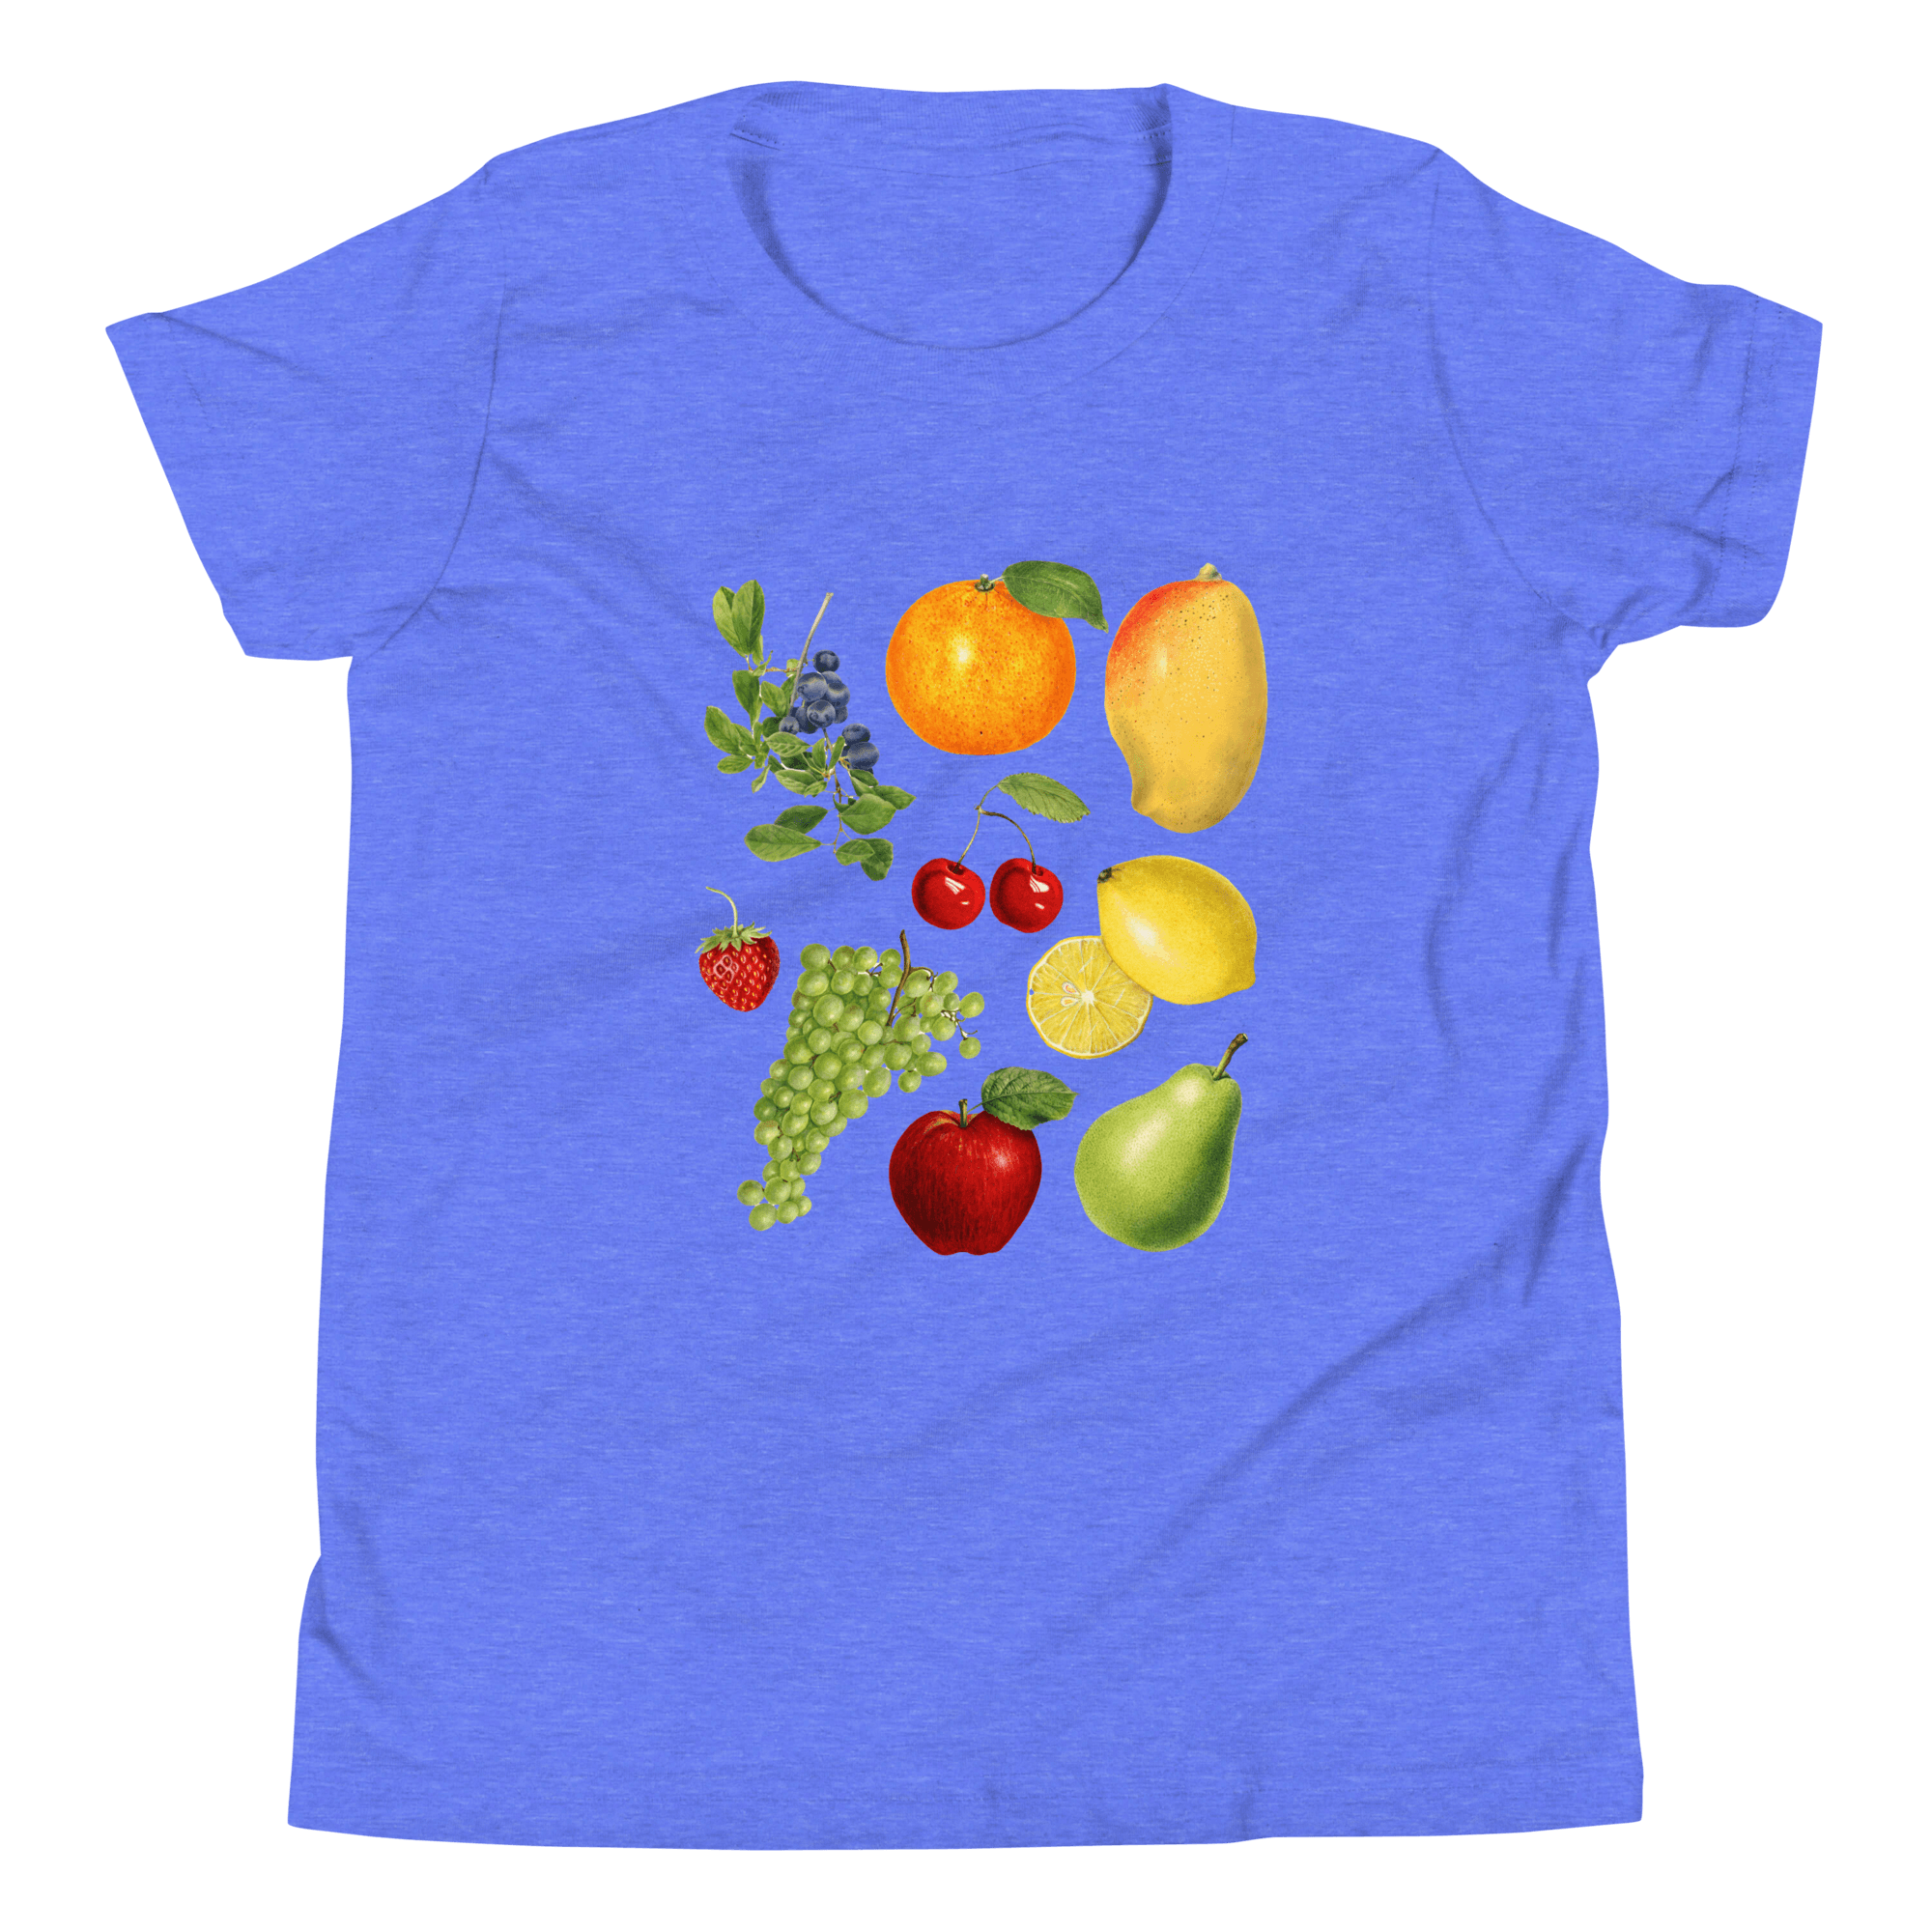 Super Fruity Youth T-Shirt - Polychrome Goods 🍊